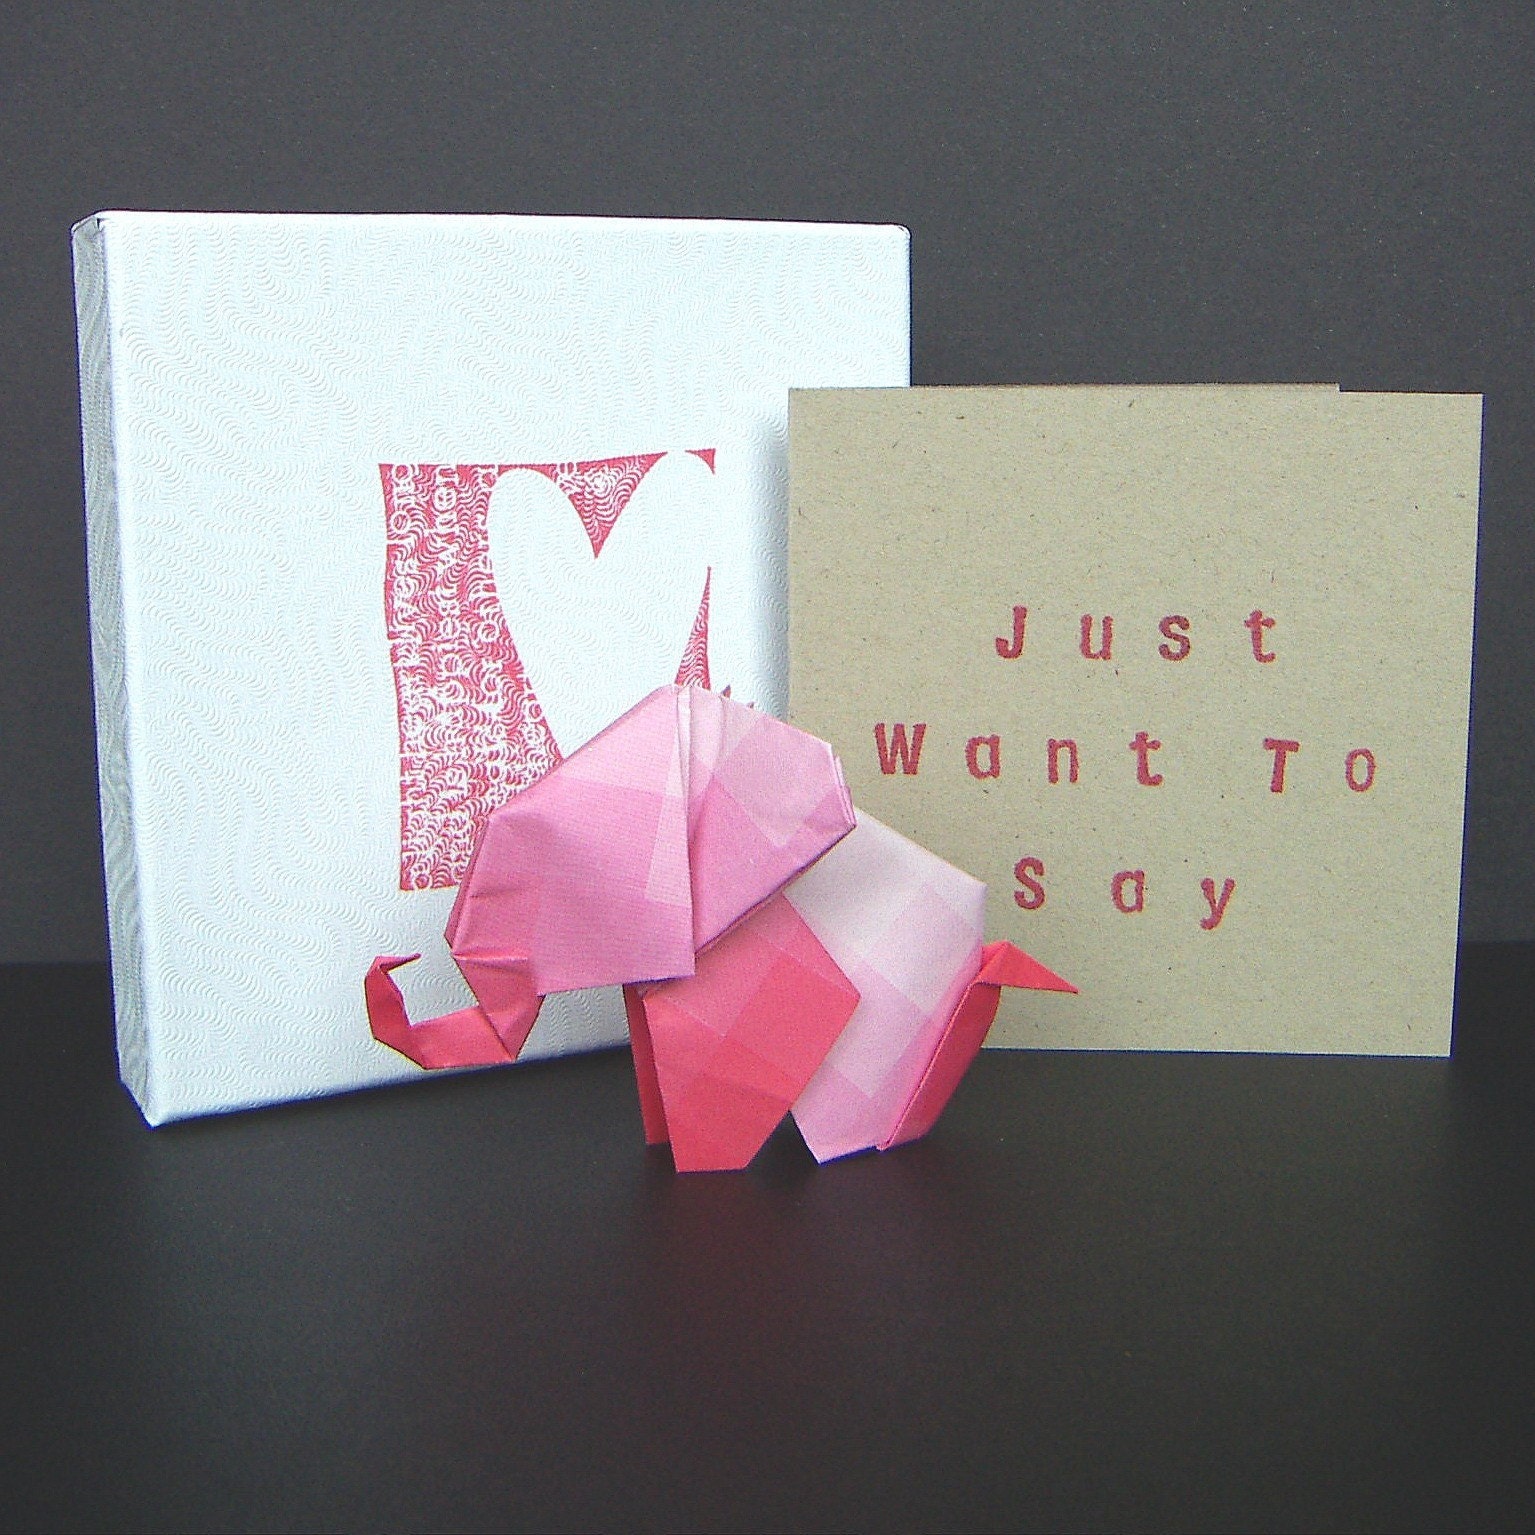 Origami Elephant Gift Box Set w/ HAPPY MOTHER'S DAY Greeting Card - Purple Blossoms/Red Pink (GB-OEPK01) - FREE Shipping